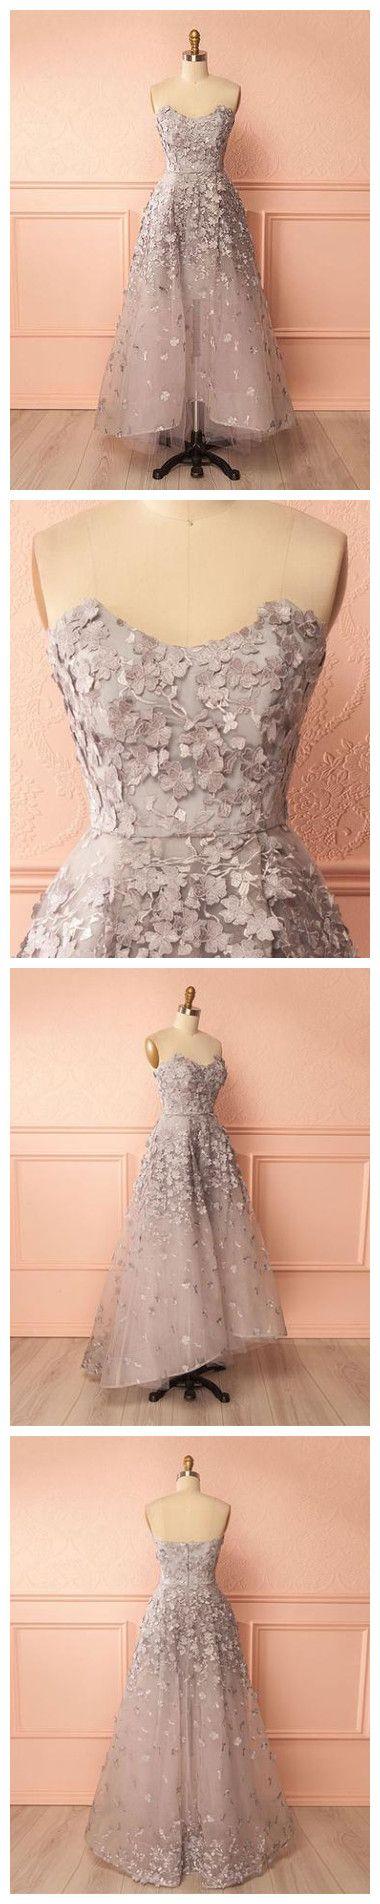 Mariage - A-line Sweetheart High Low Prom Dress Silver Applique Tulle Chic Evening Dress AM702